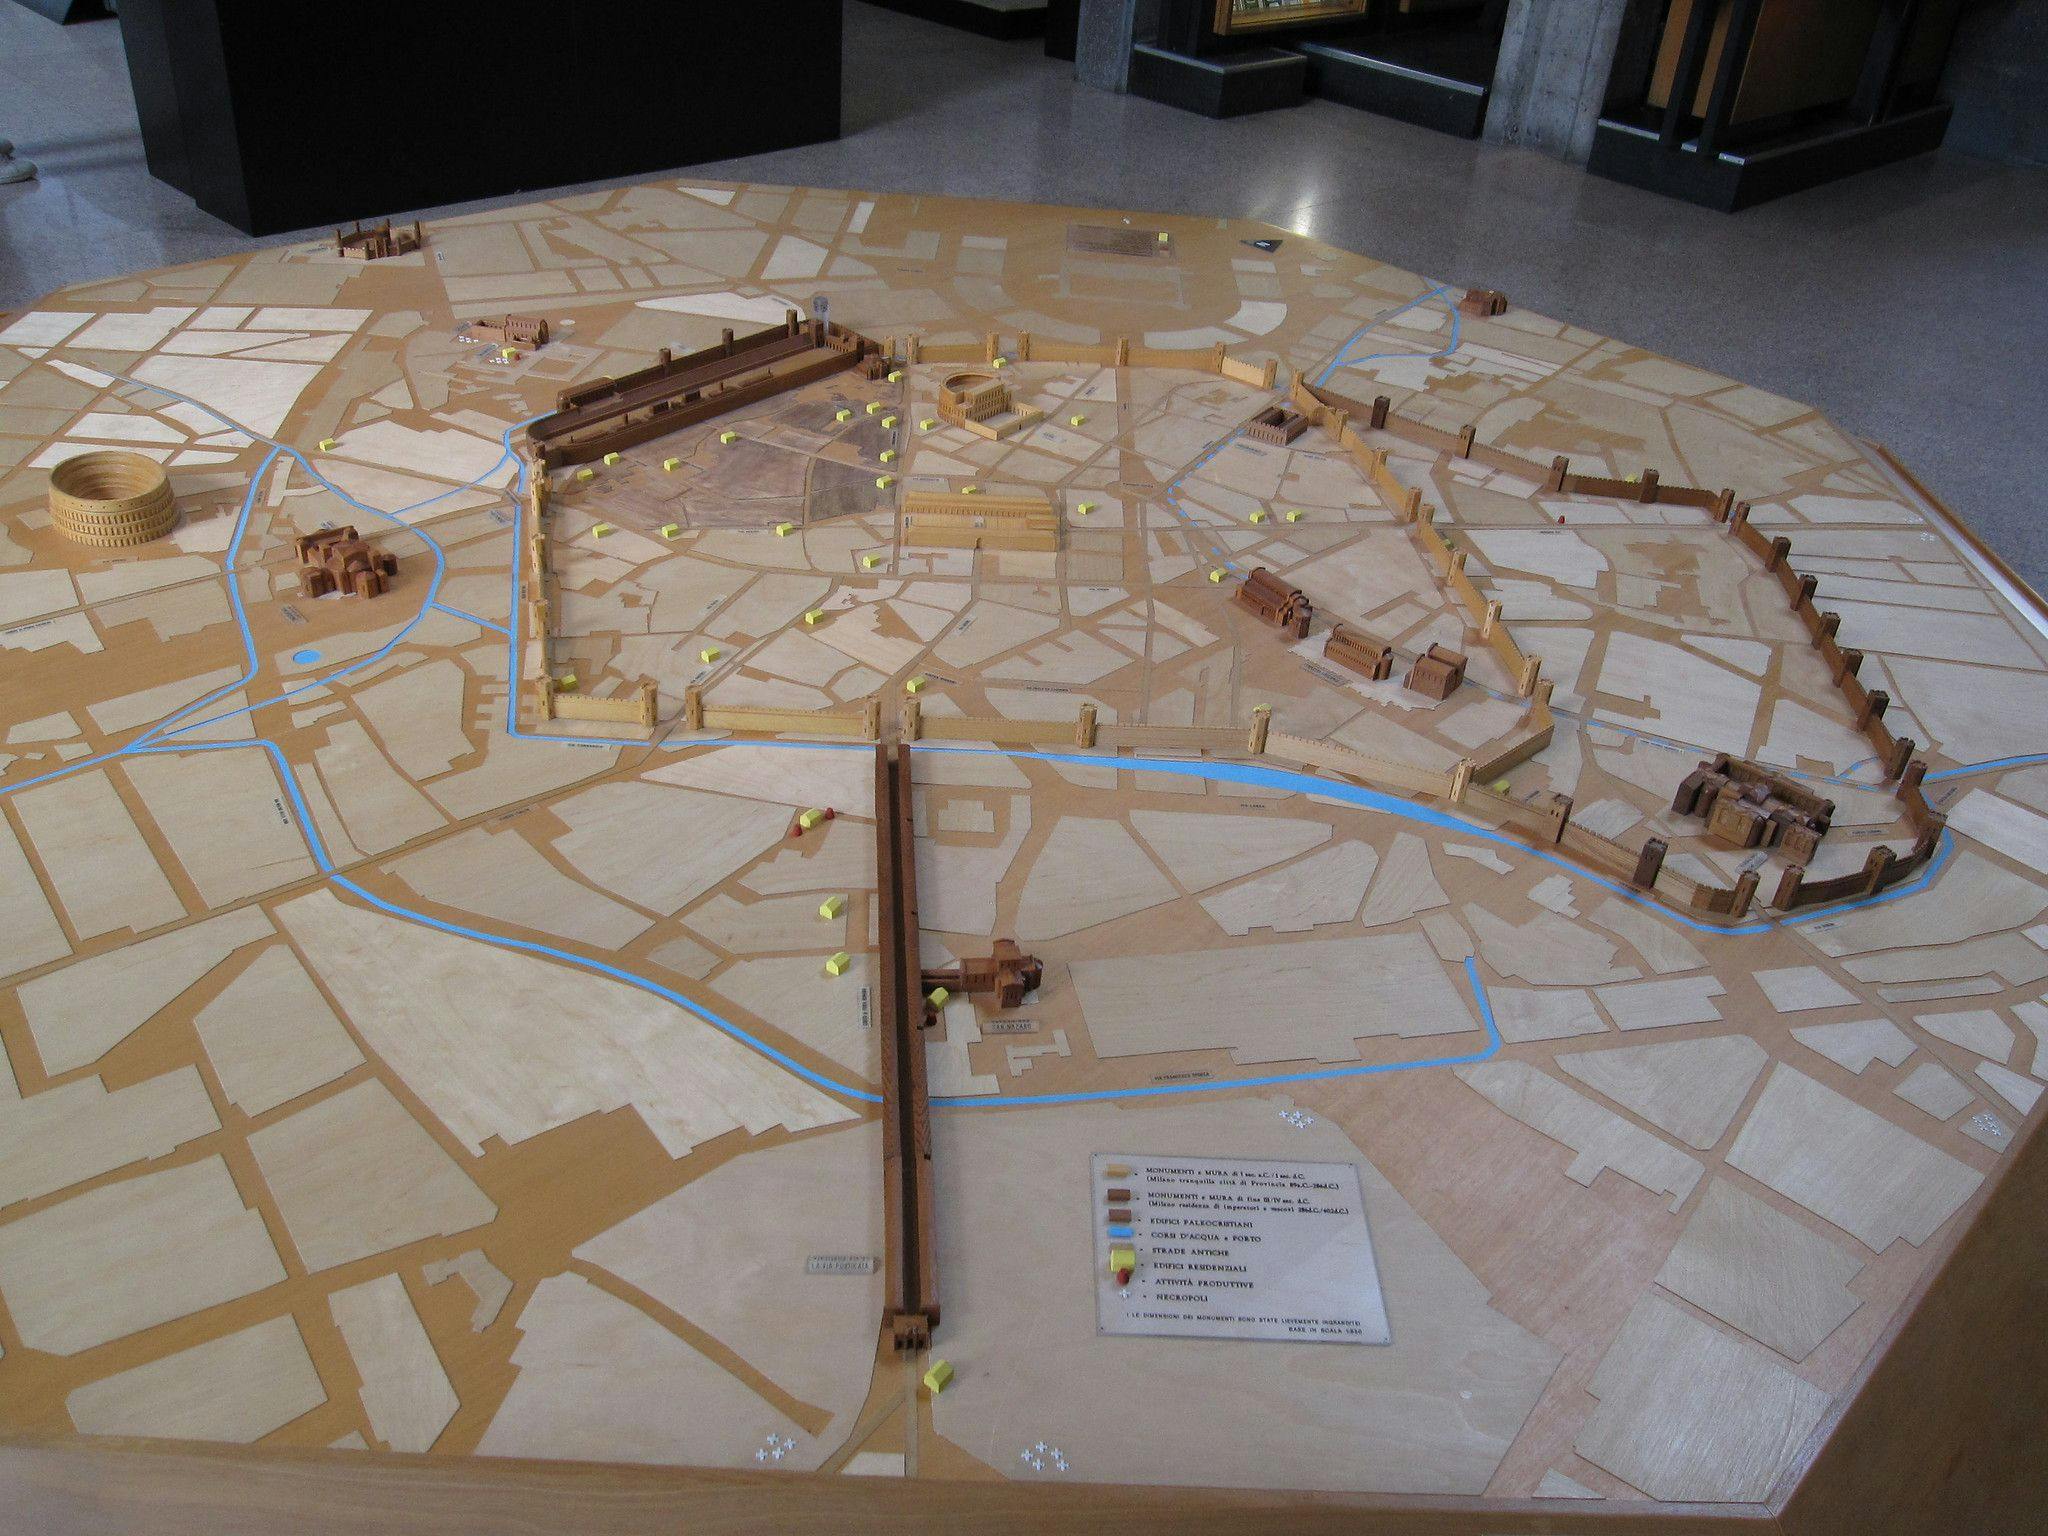 A model in wood of imperial era Mediolanum at the Archaeological Museum in Milan (by Bernt Rostad, CC BY 2.0 via WikiCommons)